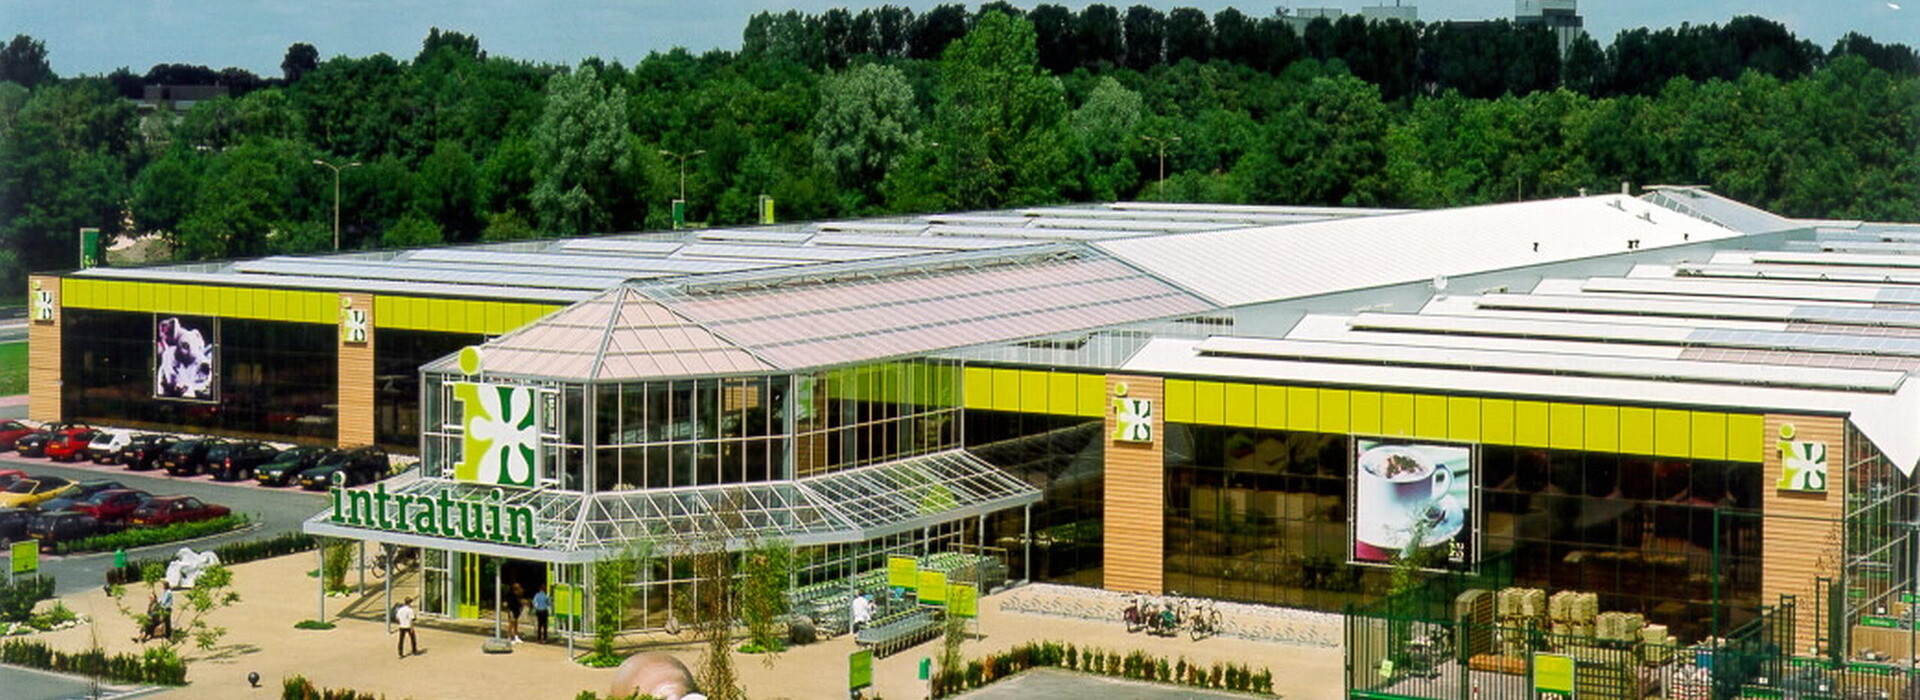 New build Intratuin, Almelo (the Netherlands) 2000